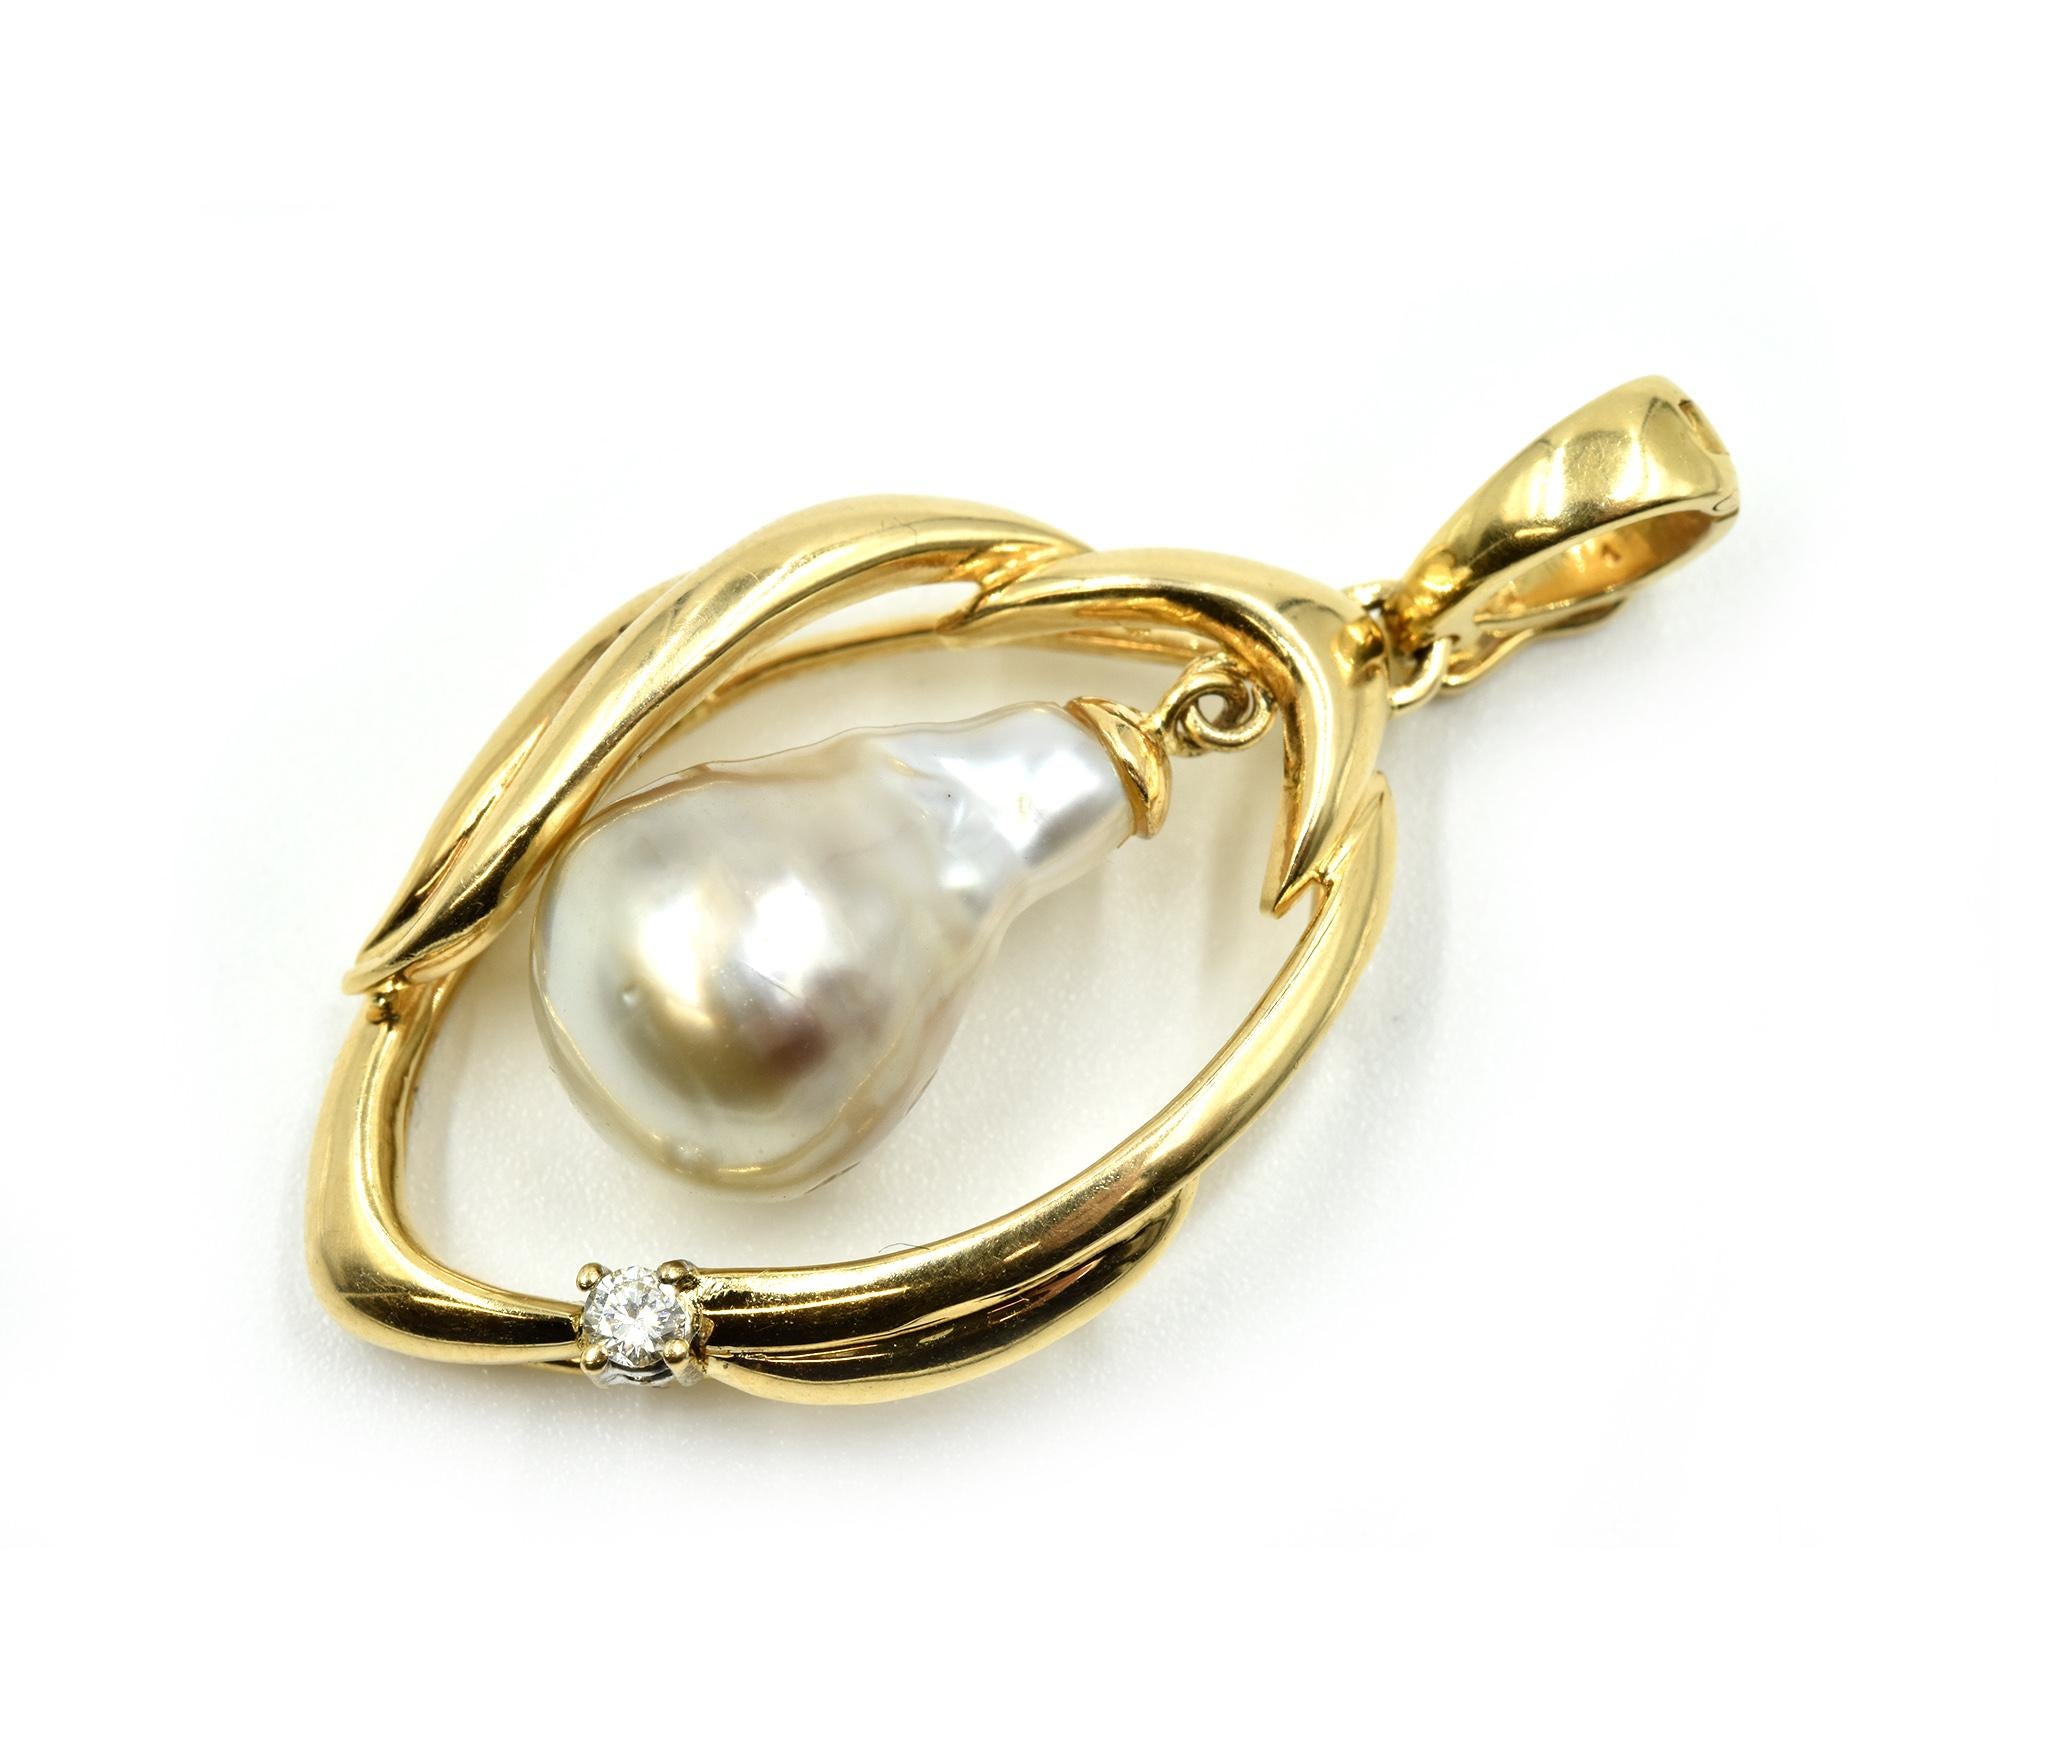 Dangling Pearl and Diamond Pendant 14 Karat Yellow Gold In Excellent Condition For Sale In Scottsdale, AZ